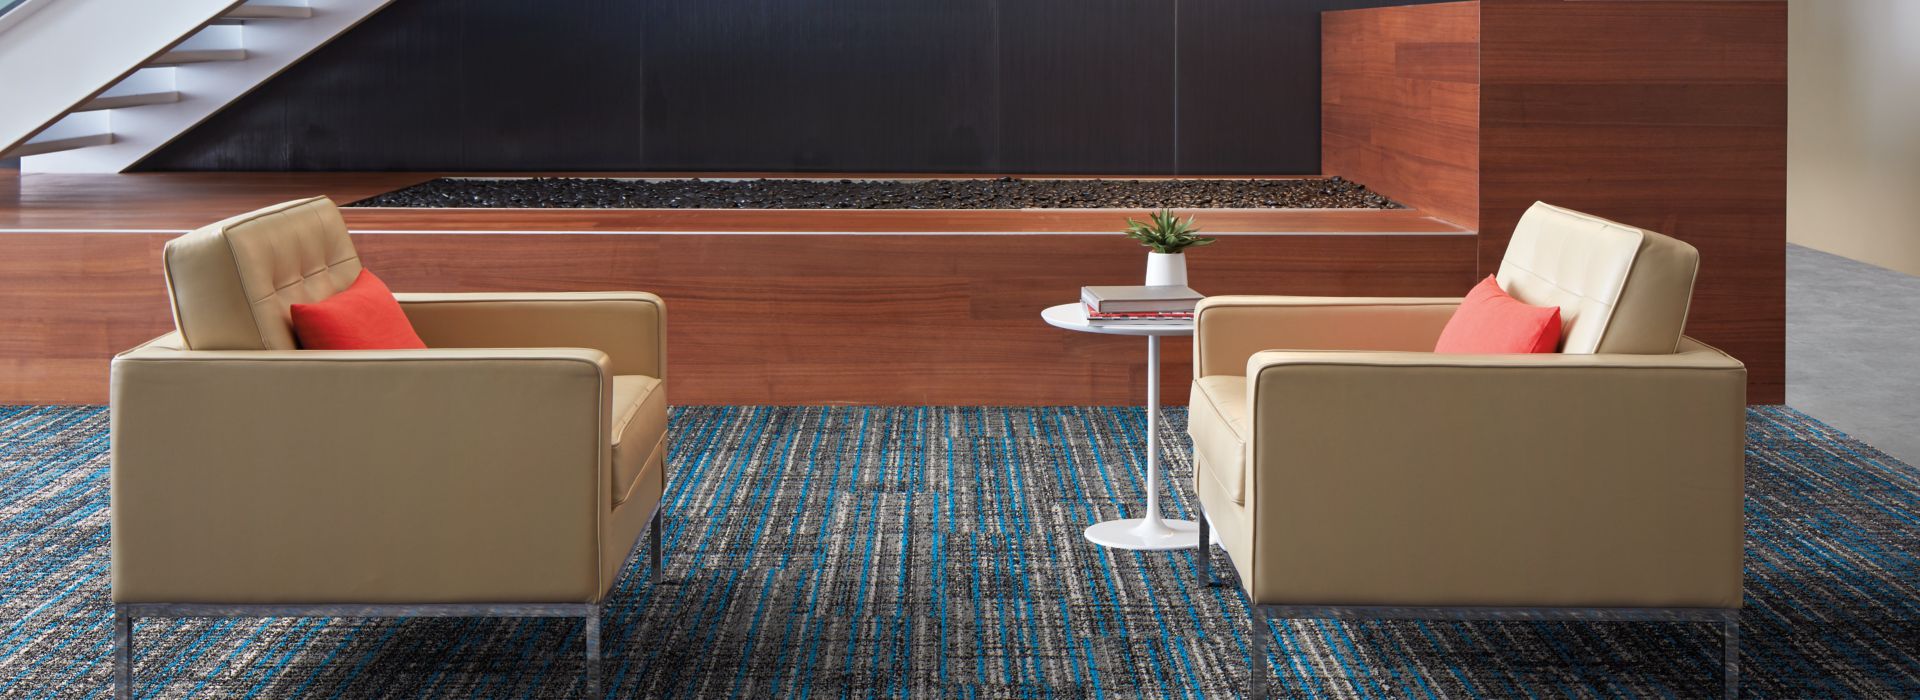 Interface Upload carpet tile and Textured Stones LVT in lobby area with couches numéro d’image 1